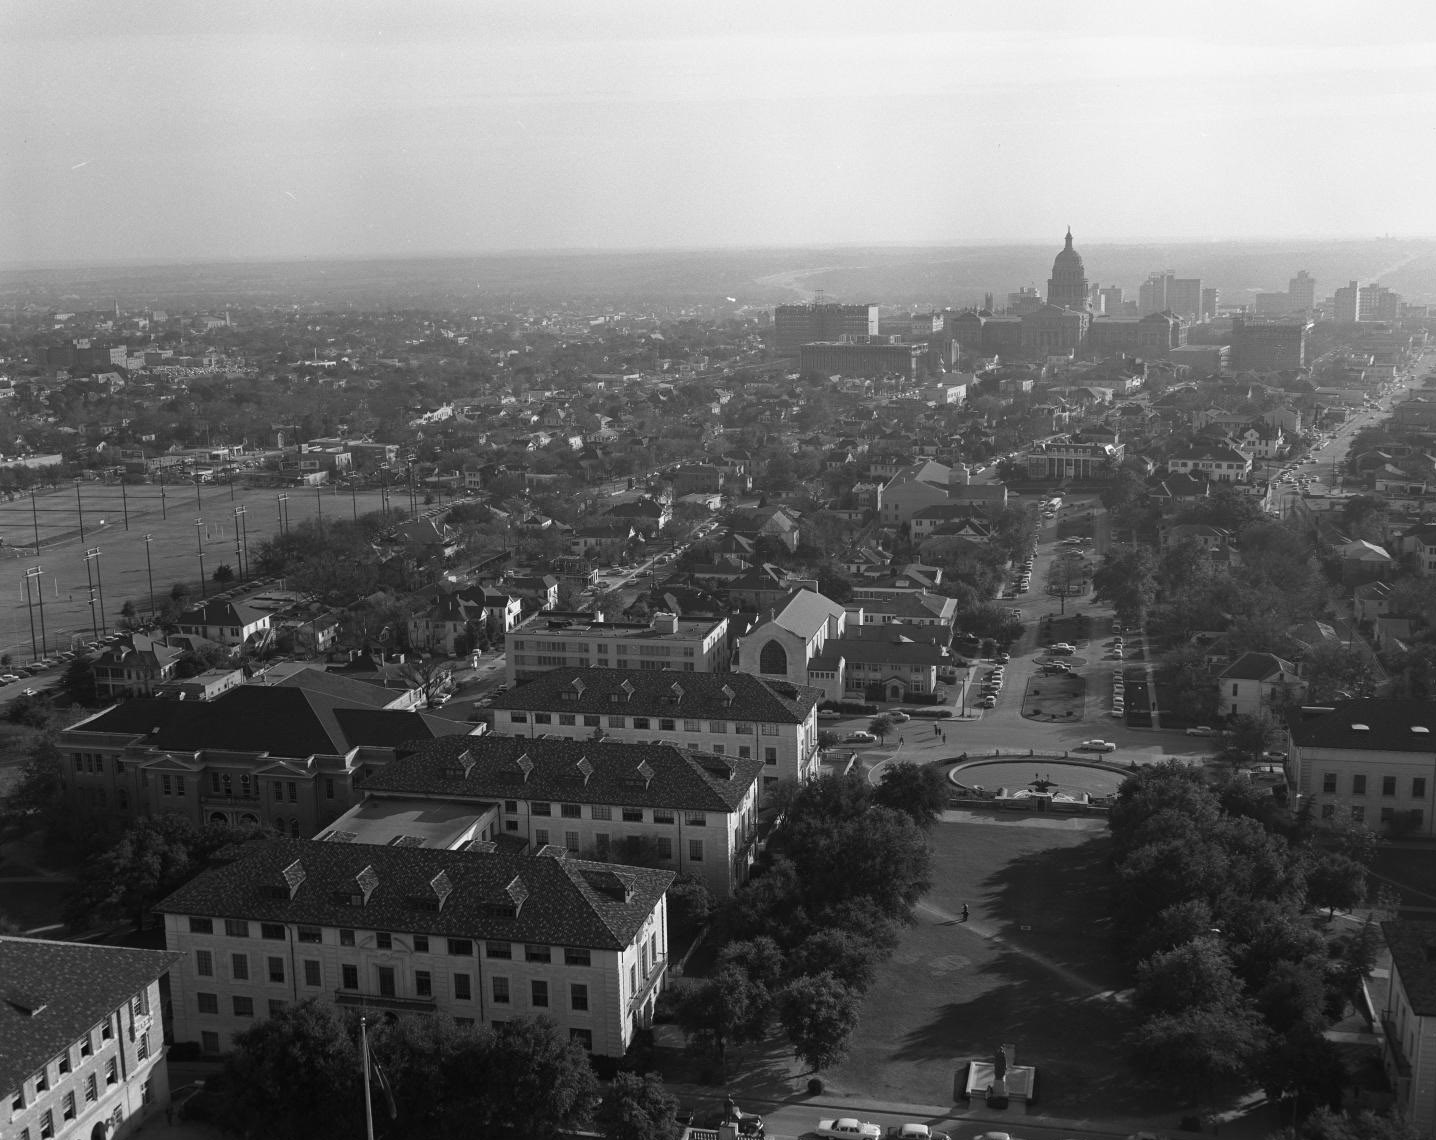 Southward View of UT Austin Tower on South Mall, 1958.